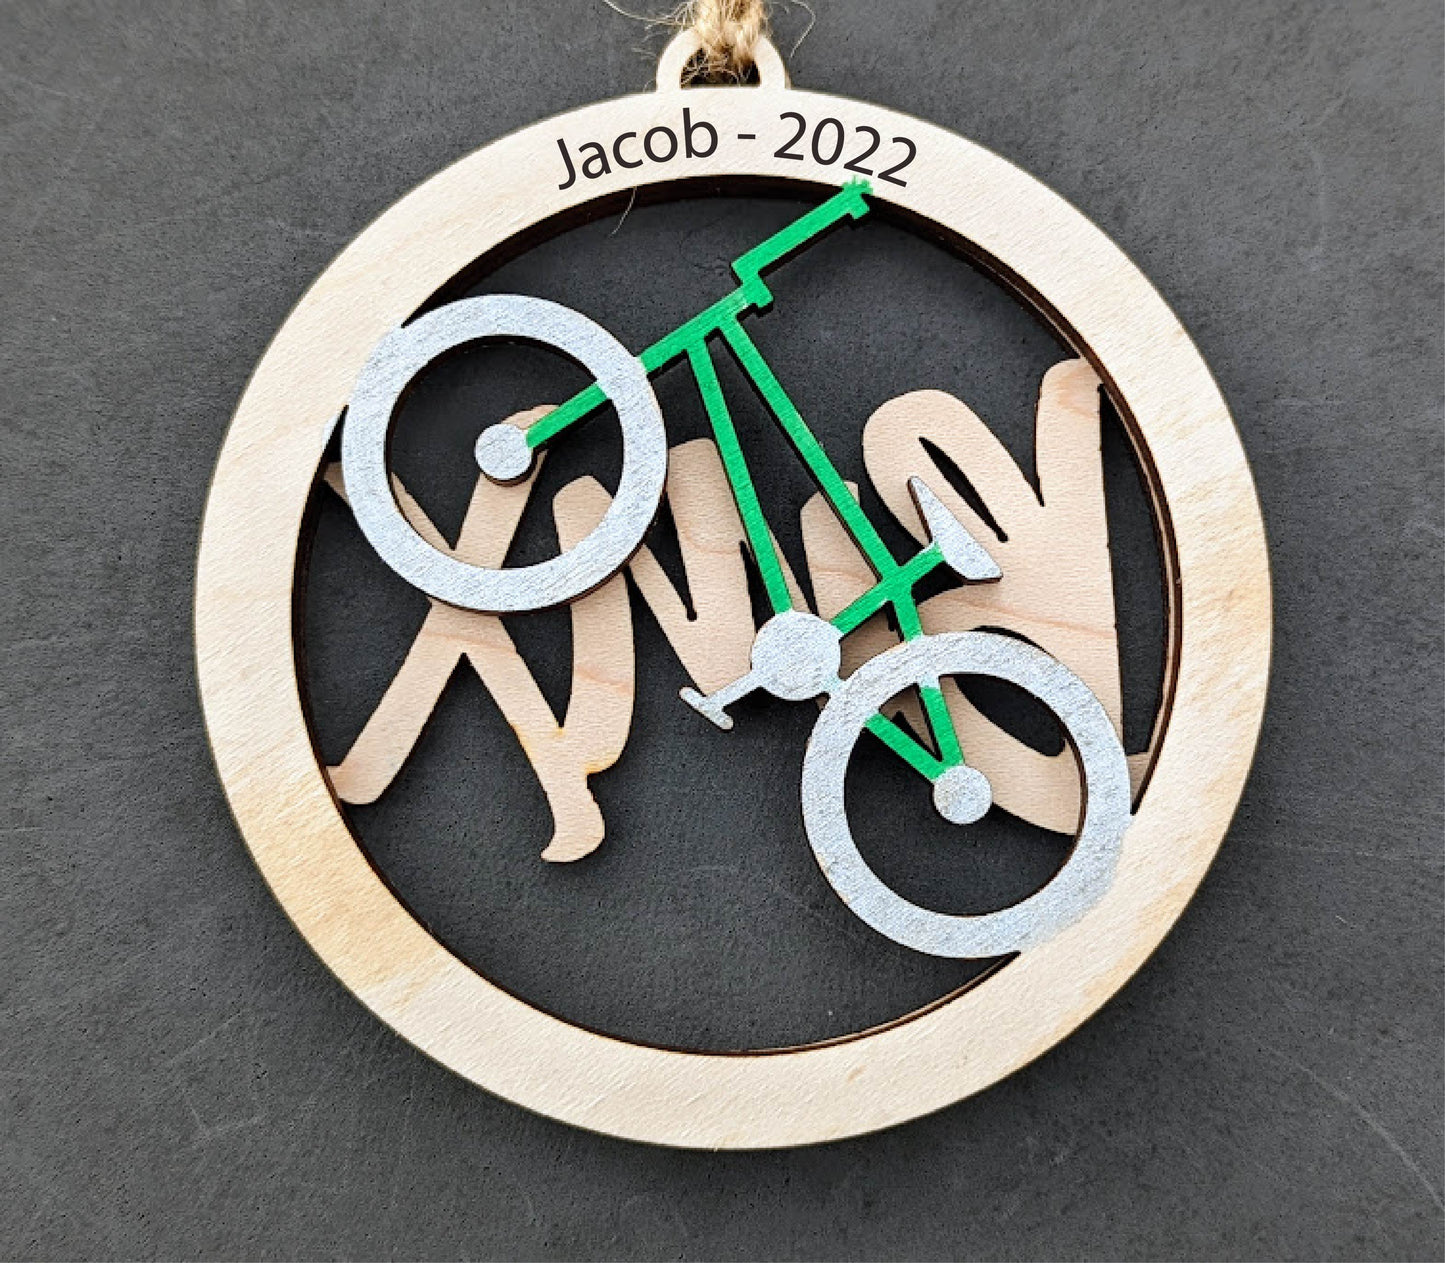 BMX svg - Bicycle Motocross rider gift - Ornament or Car charm svg - Can be customized with name or message - Laser cut file for Glowforge